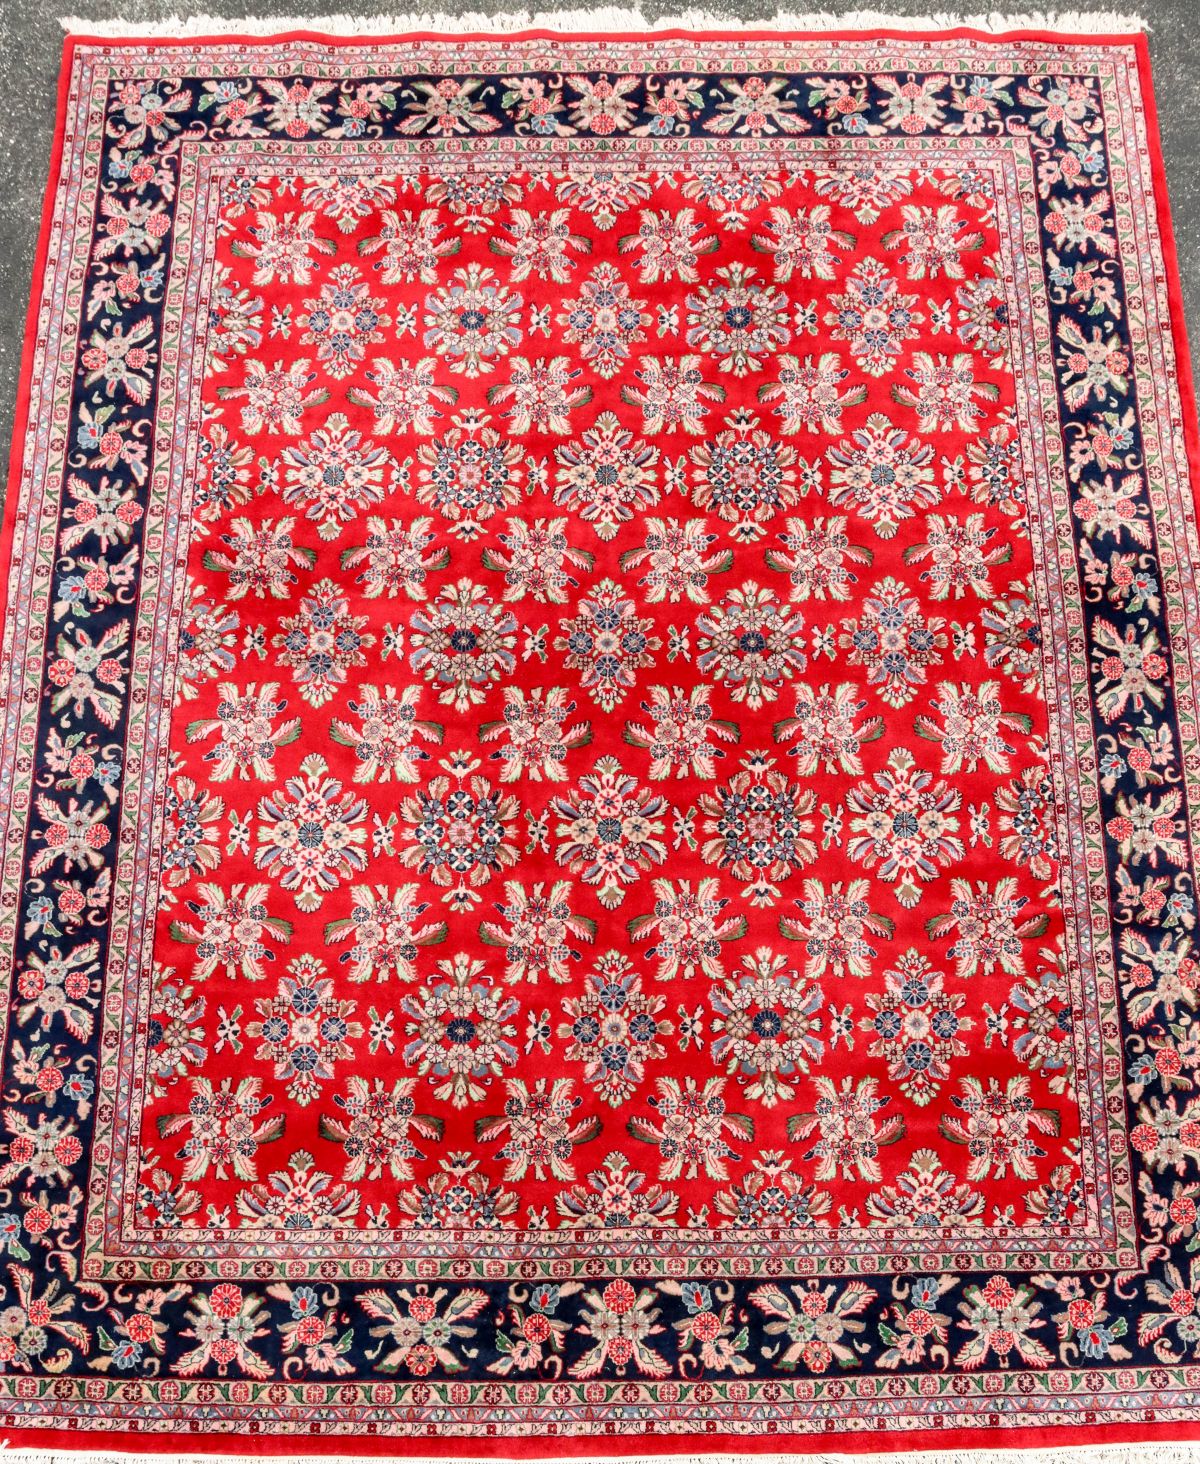 A LATE 20TH CENTURY HAND MADE ROOM SIZE PERSIAN CARPET